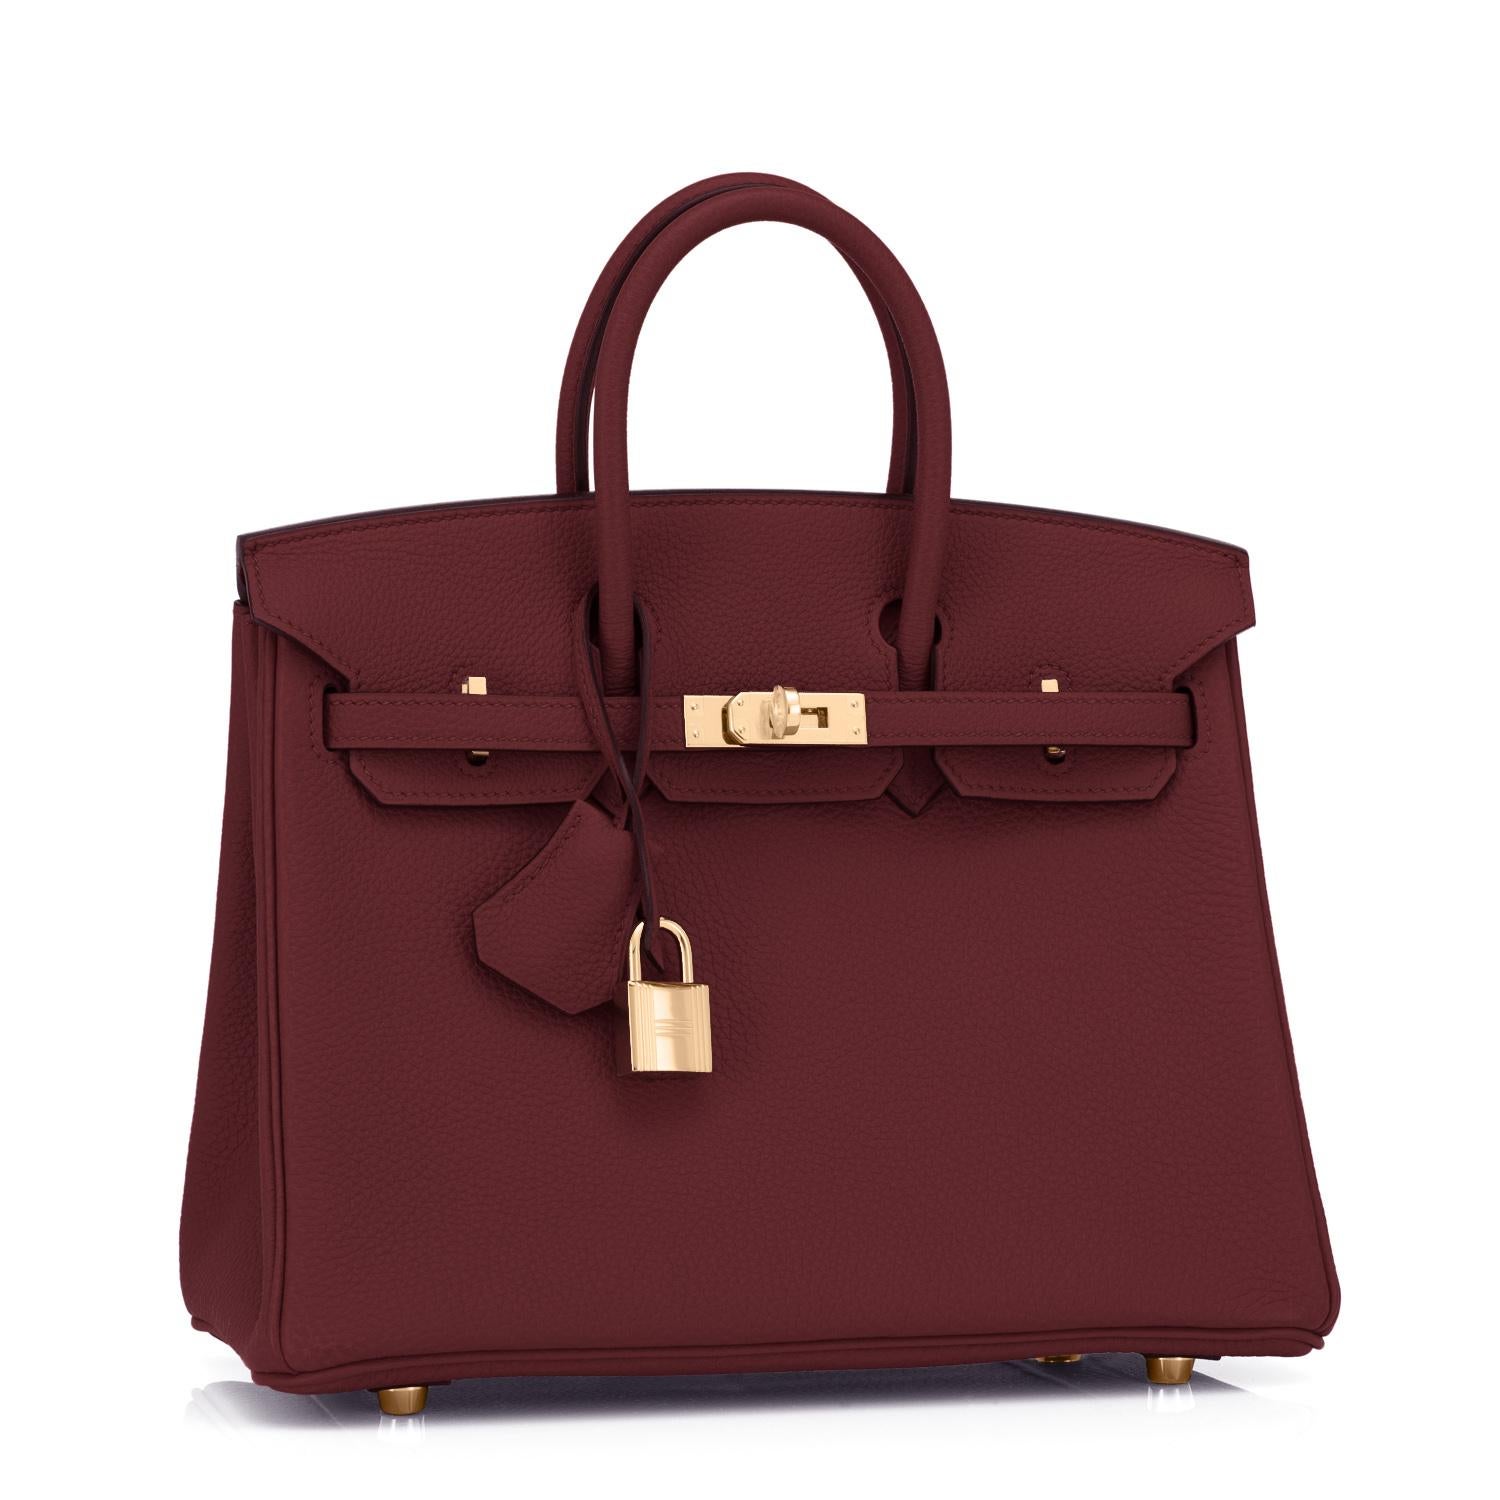 Hermes Birkin 25cm Rouge H Togo Gold Deep Bordeaux Red Birkin Bag Y Stamp, 2020
Just purchased from Hermes store; bag bears new 2020 interior Y Stamp.
Brand New in Box. Store Fresh. Pristine Condition (with plastic on hardware).
Perfect gift! Coming